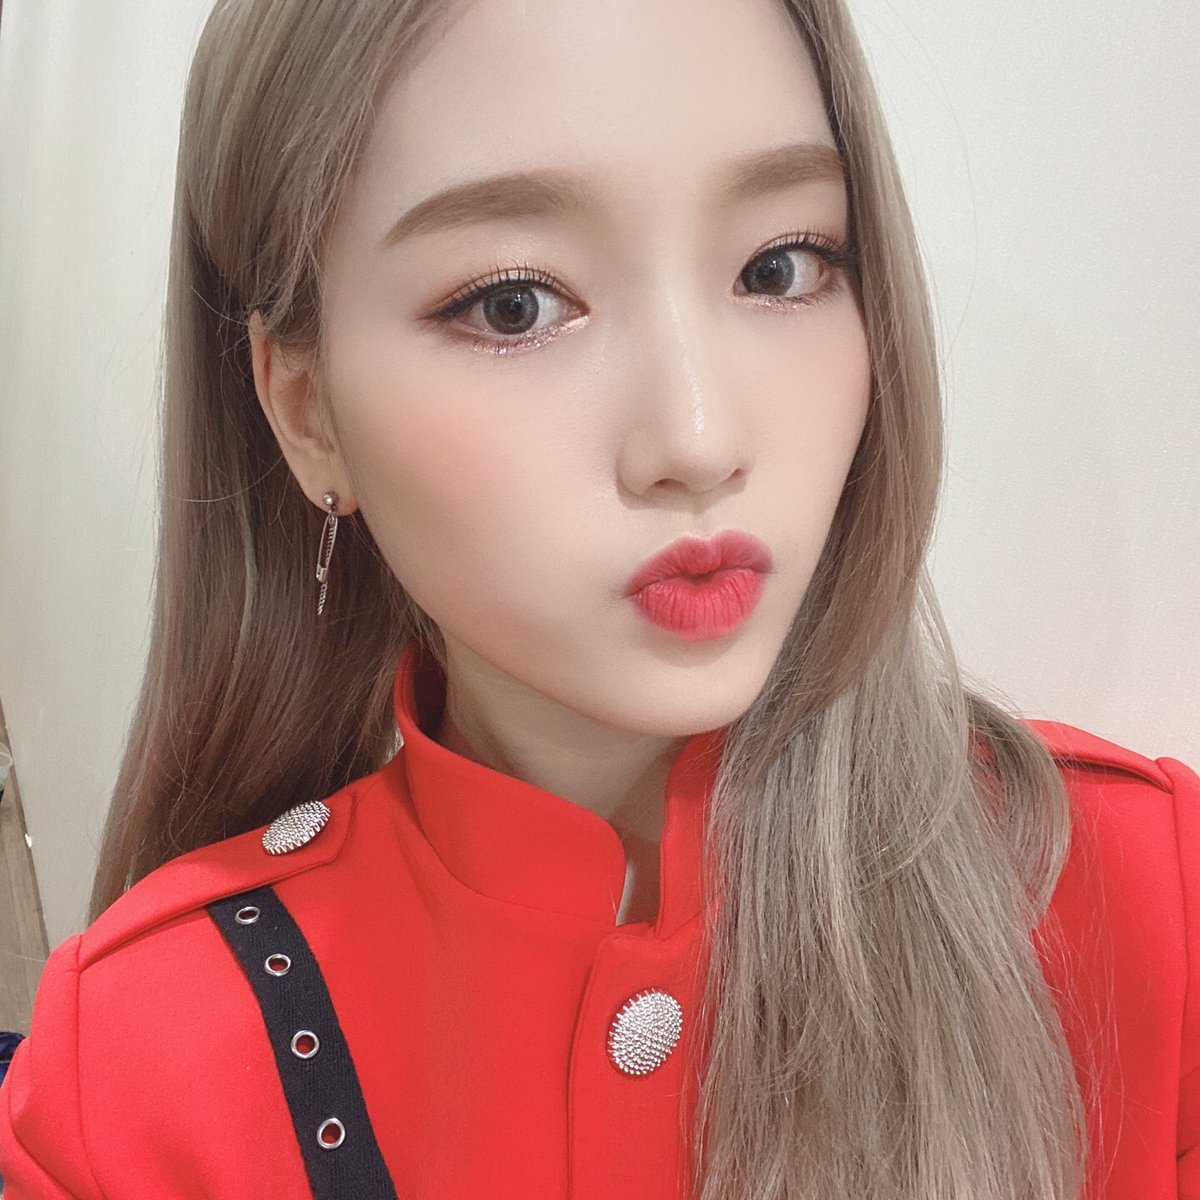 Gowon - Slytherin A QUEENCUNNINGLoyalShe will use her good girl face to get people do what she wants She's actually a good kid, she just love messing up with peopleTalk shit behind your back AND IN FRONT OF YOUTimid but fierce